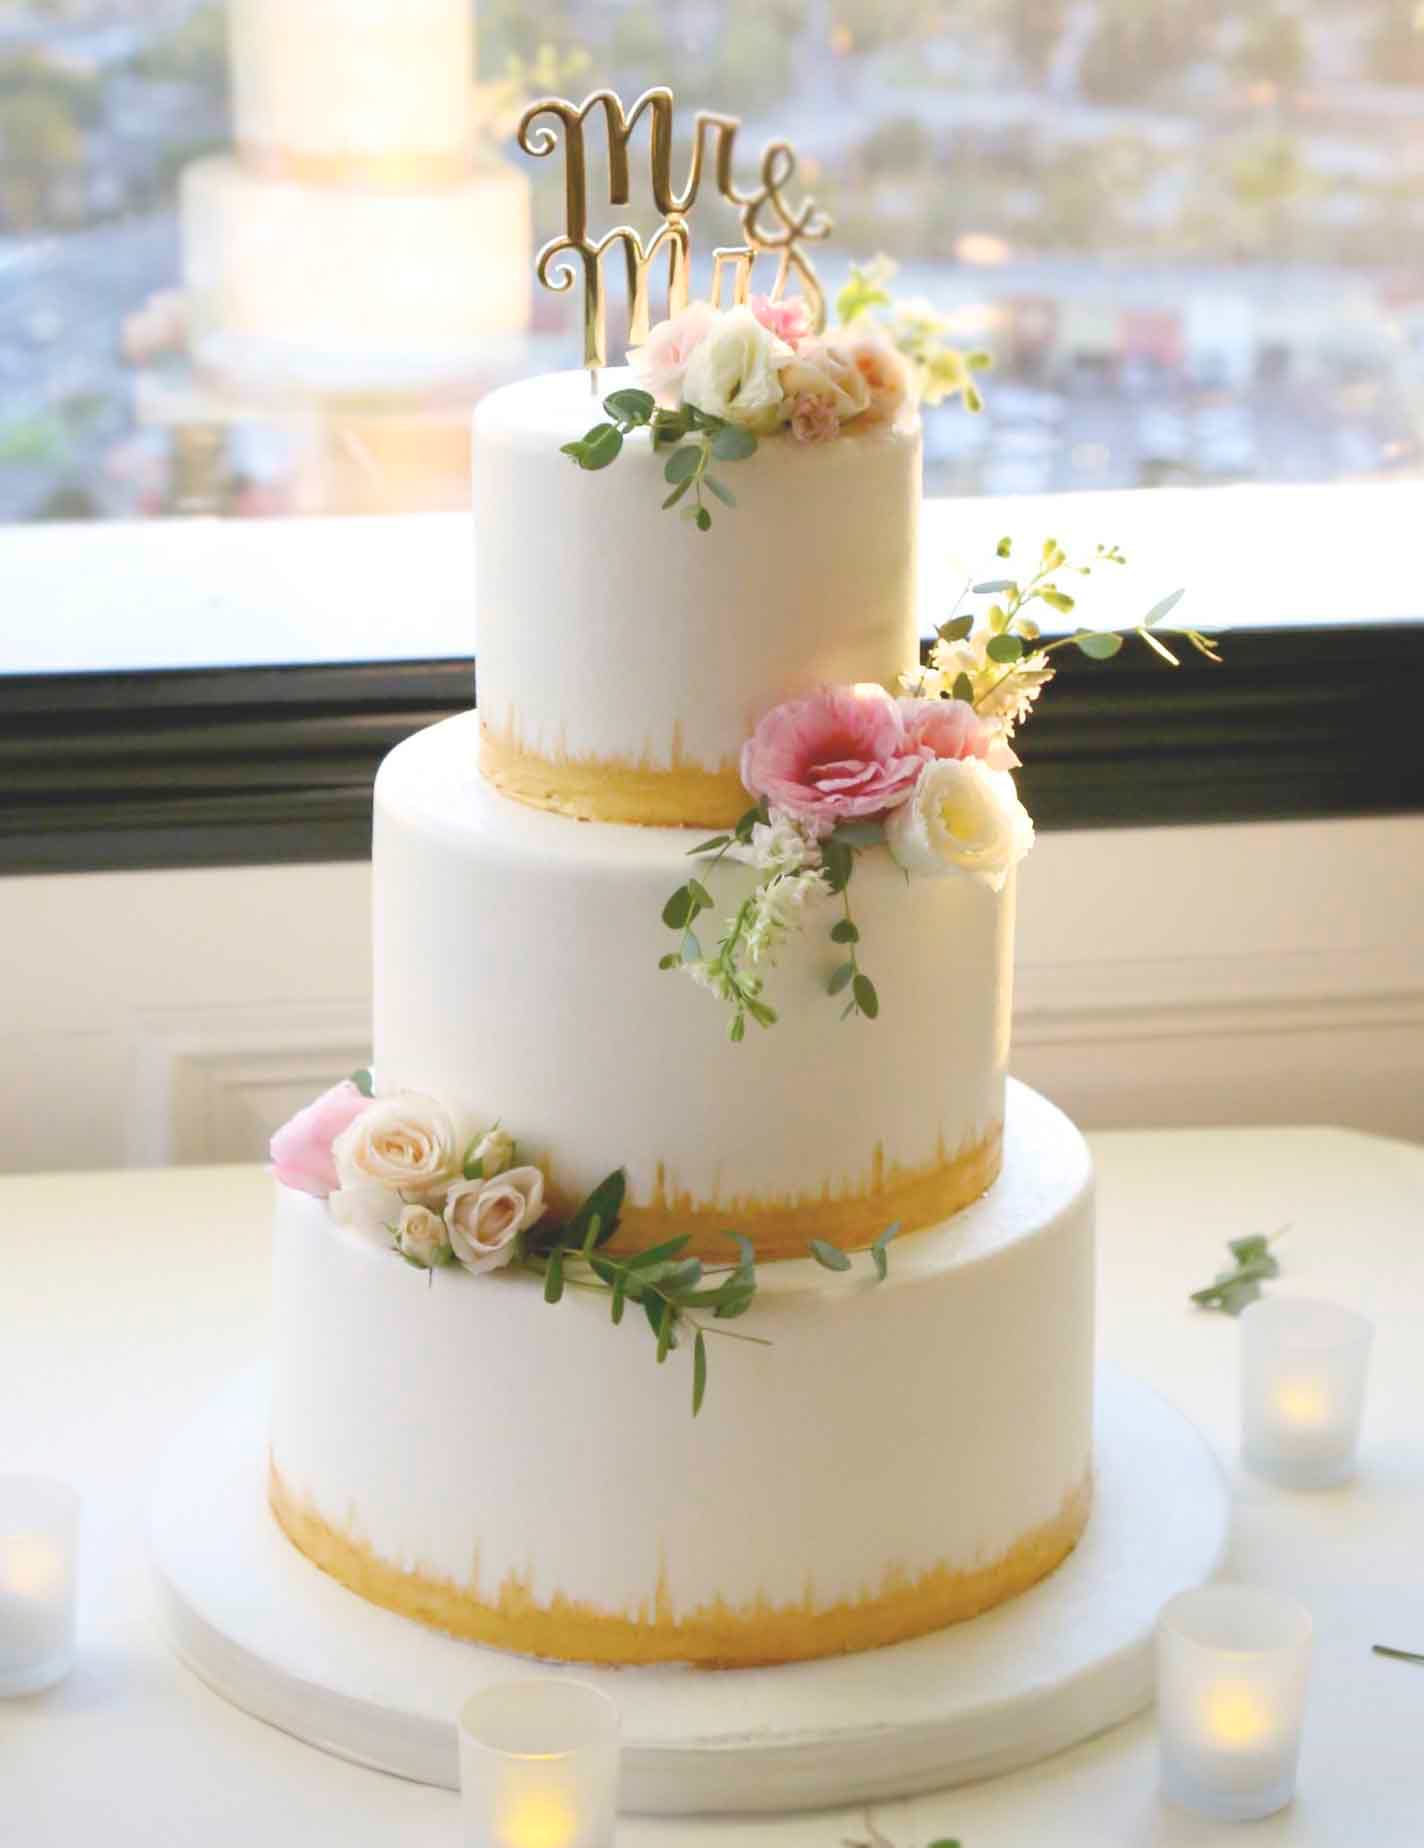 Lillian and Josh's three-tier wedding cake featured gold accents and pink roses